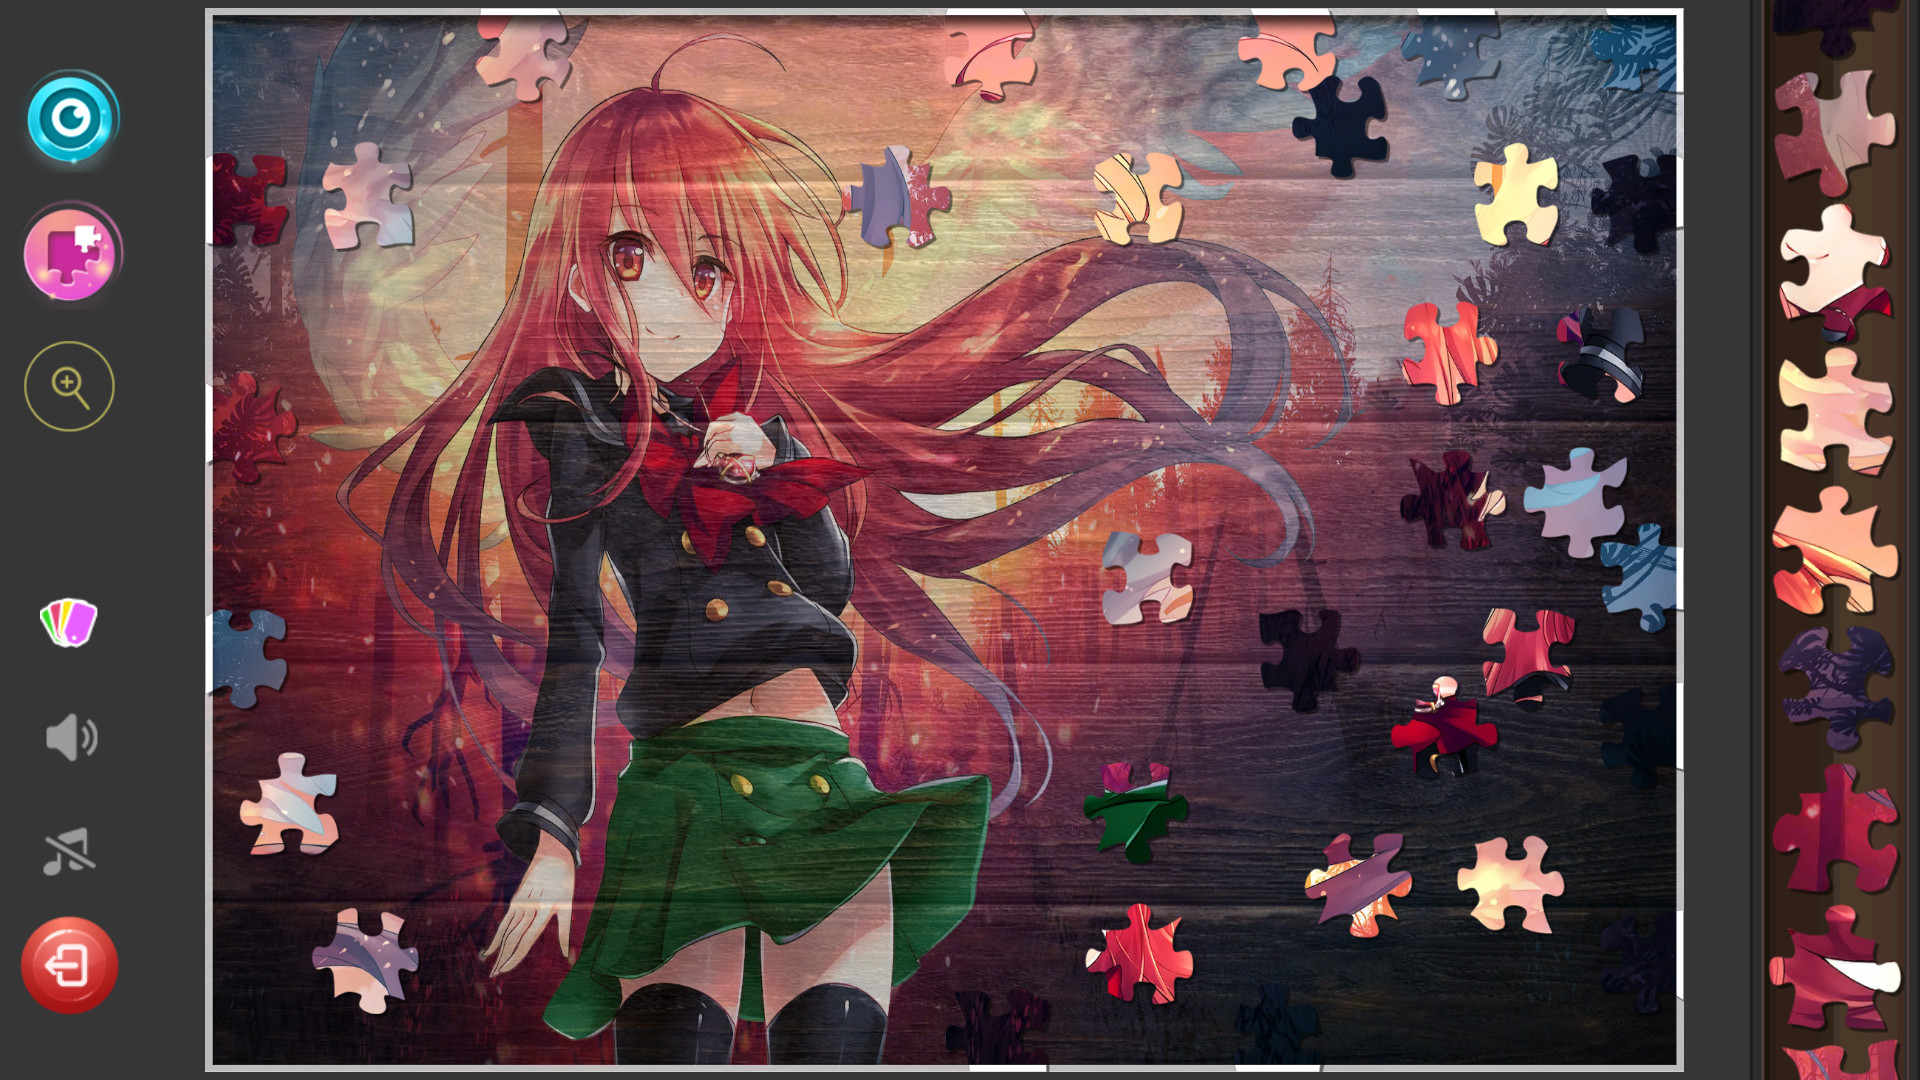 Anime Student Girl in Tokyo Night Time Jigsaw Puzzle